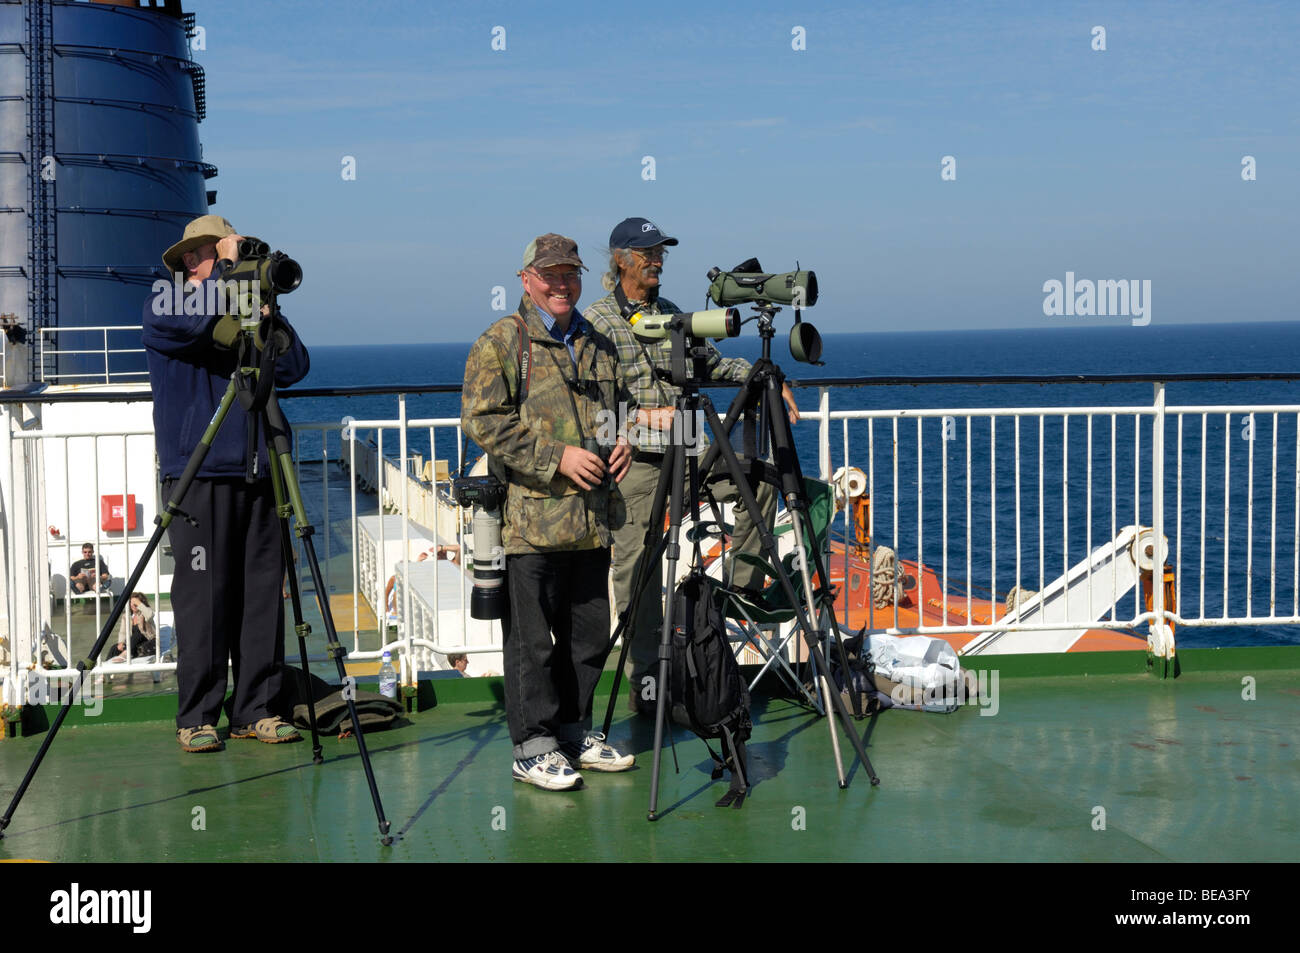 Group of passengers on deck of P&O 'Pride of Bilbao' ferry in Bay of Biscay whale watching Stock Photo